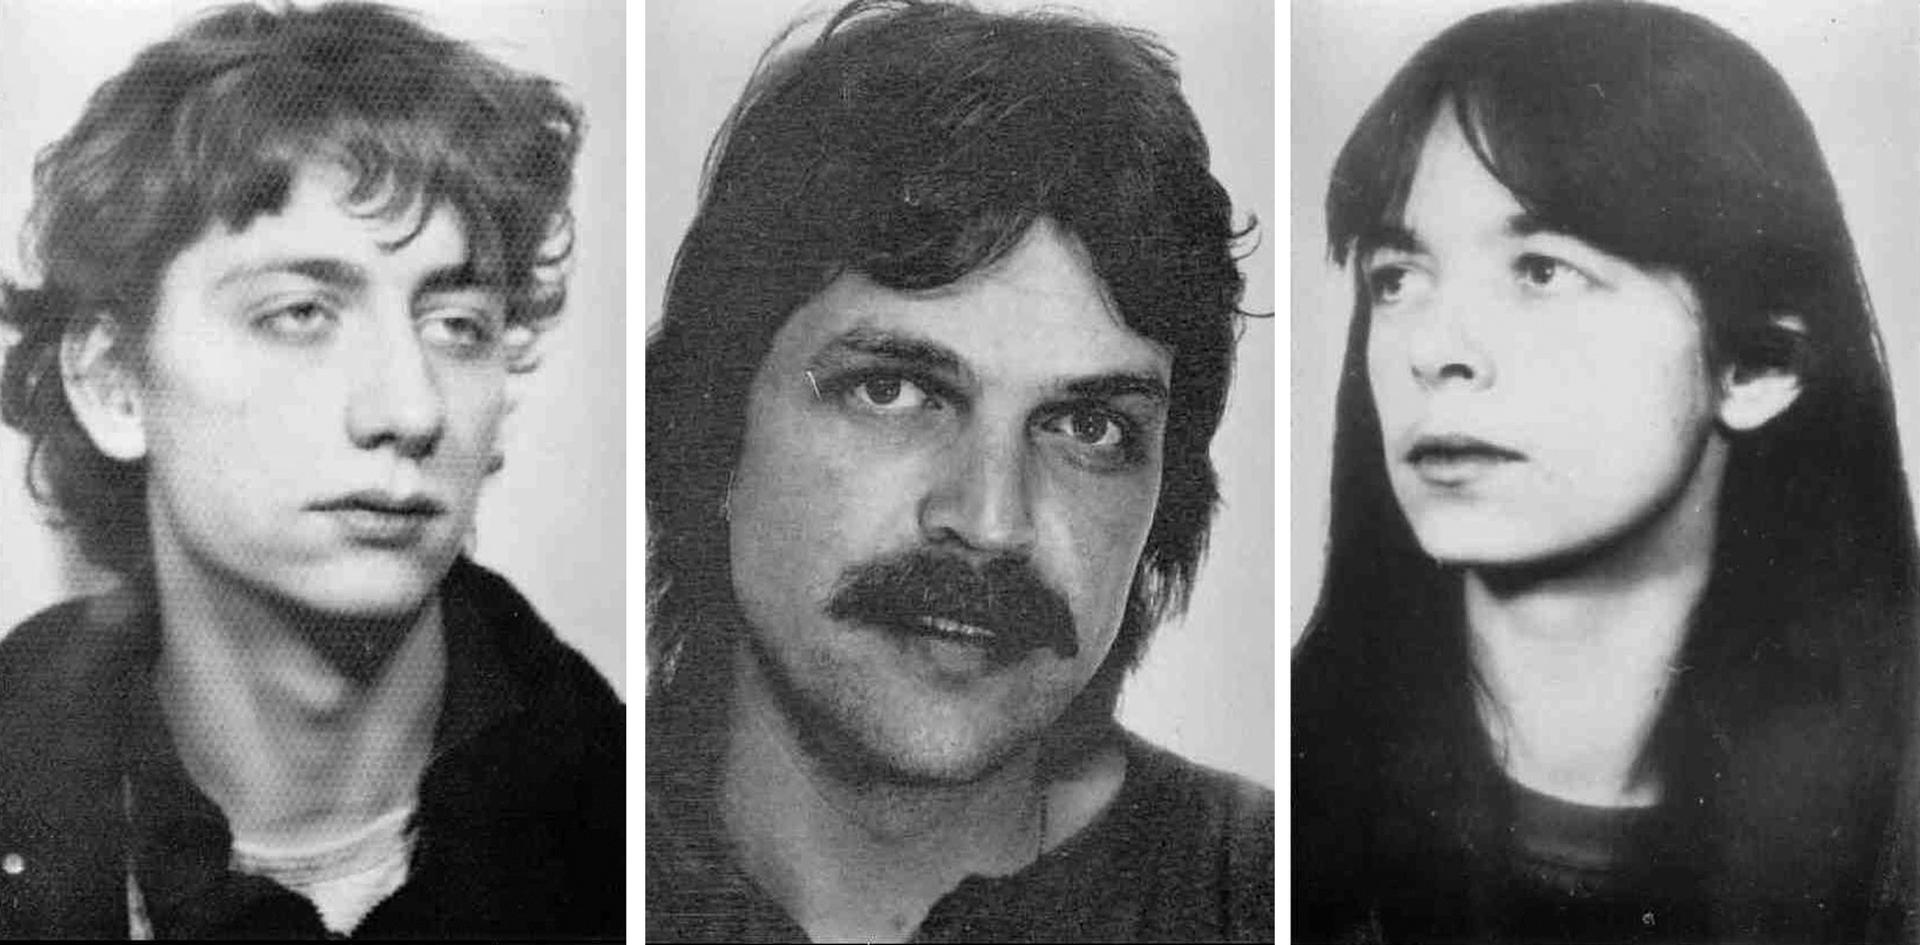 Three mug shots in black and white of suspected members of a terror group, RAF.